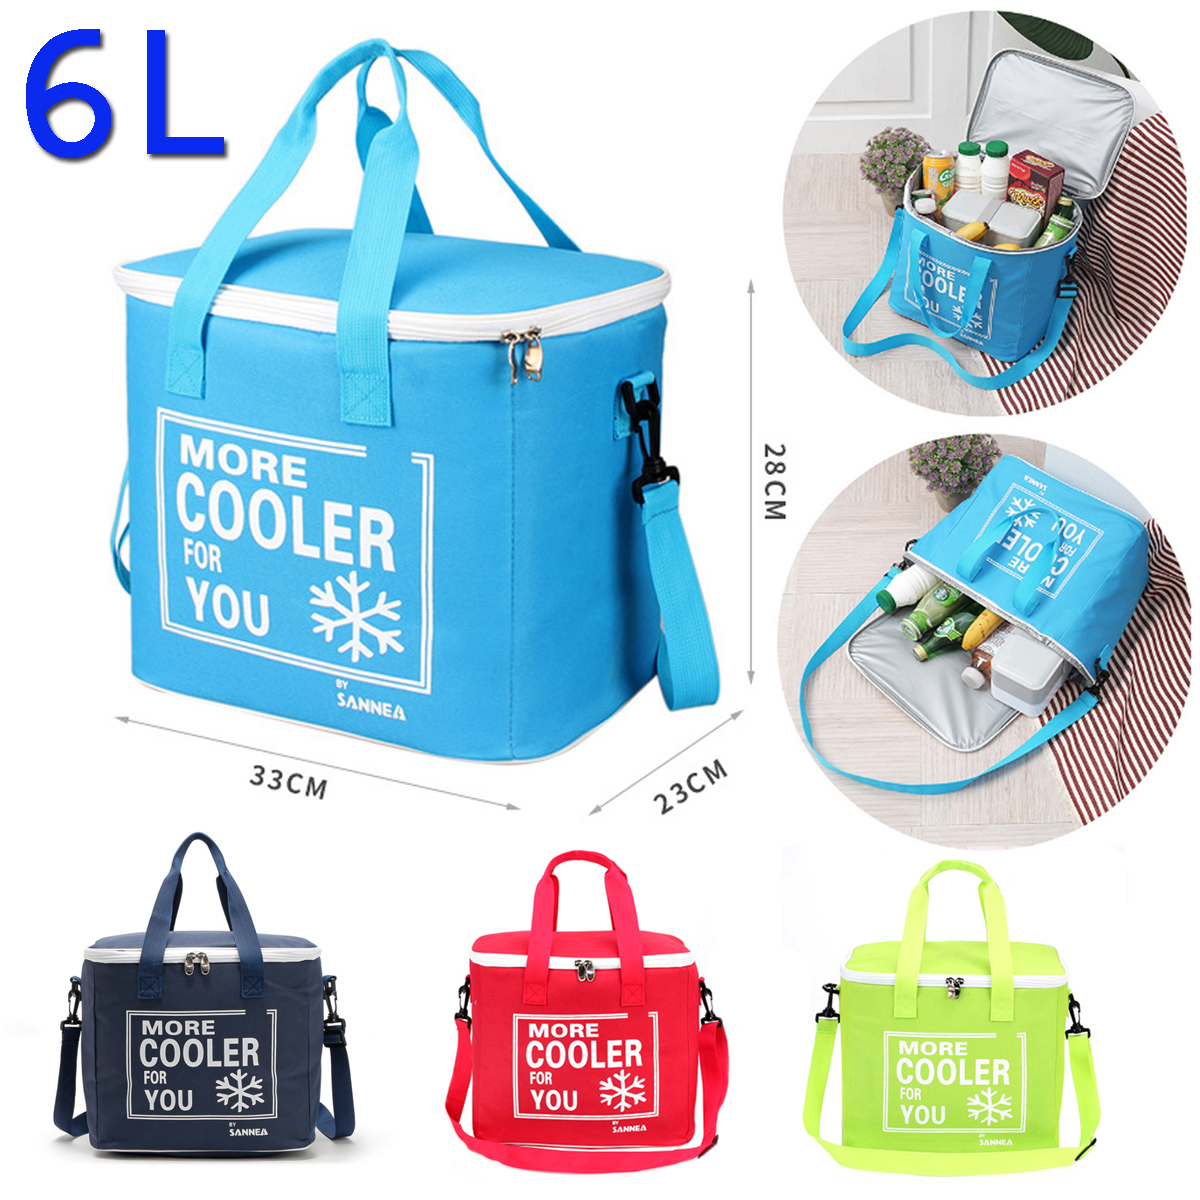 6L-Outdoor-Portable-Insulated-Thermal-Cooler-Bag-Picnic-Lunch-Box-Food-Container-Pouch-1463518-1